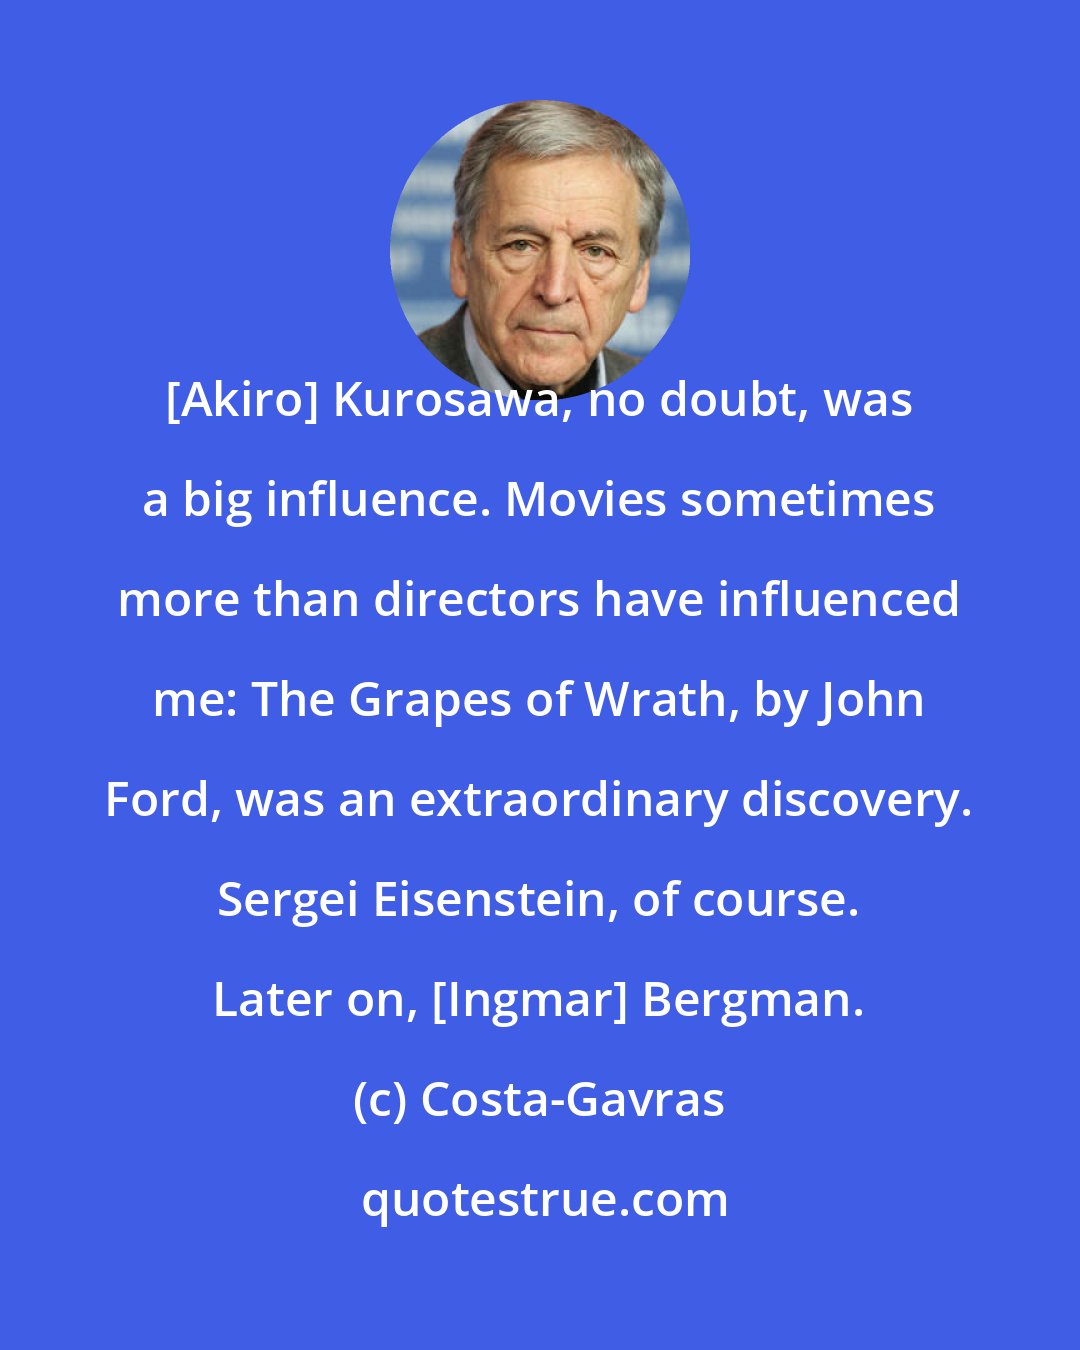 Costa-Gavras: [Akiro] Kurosawa, no doubt, was a big influence. Movies sometimes more than directors have influenced me: The Grapes of Wrath, by John Ford, was an extraordinary discovery. Sergei Eisenstein, of course. Later on, [Ingmar] Bergman.